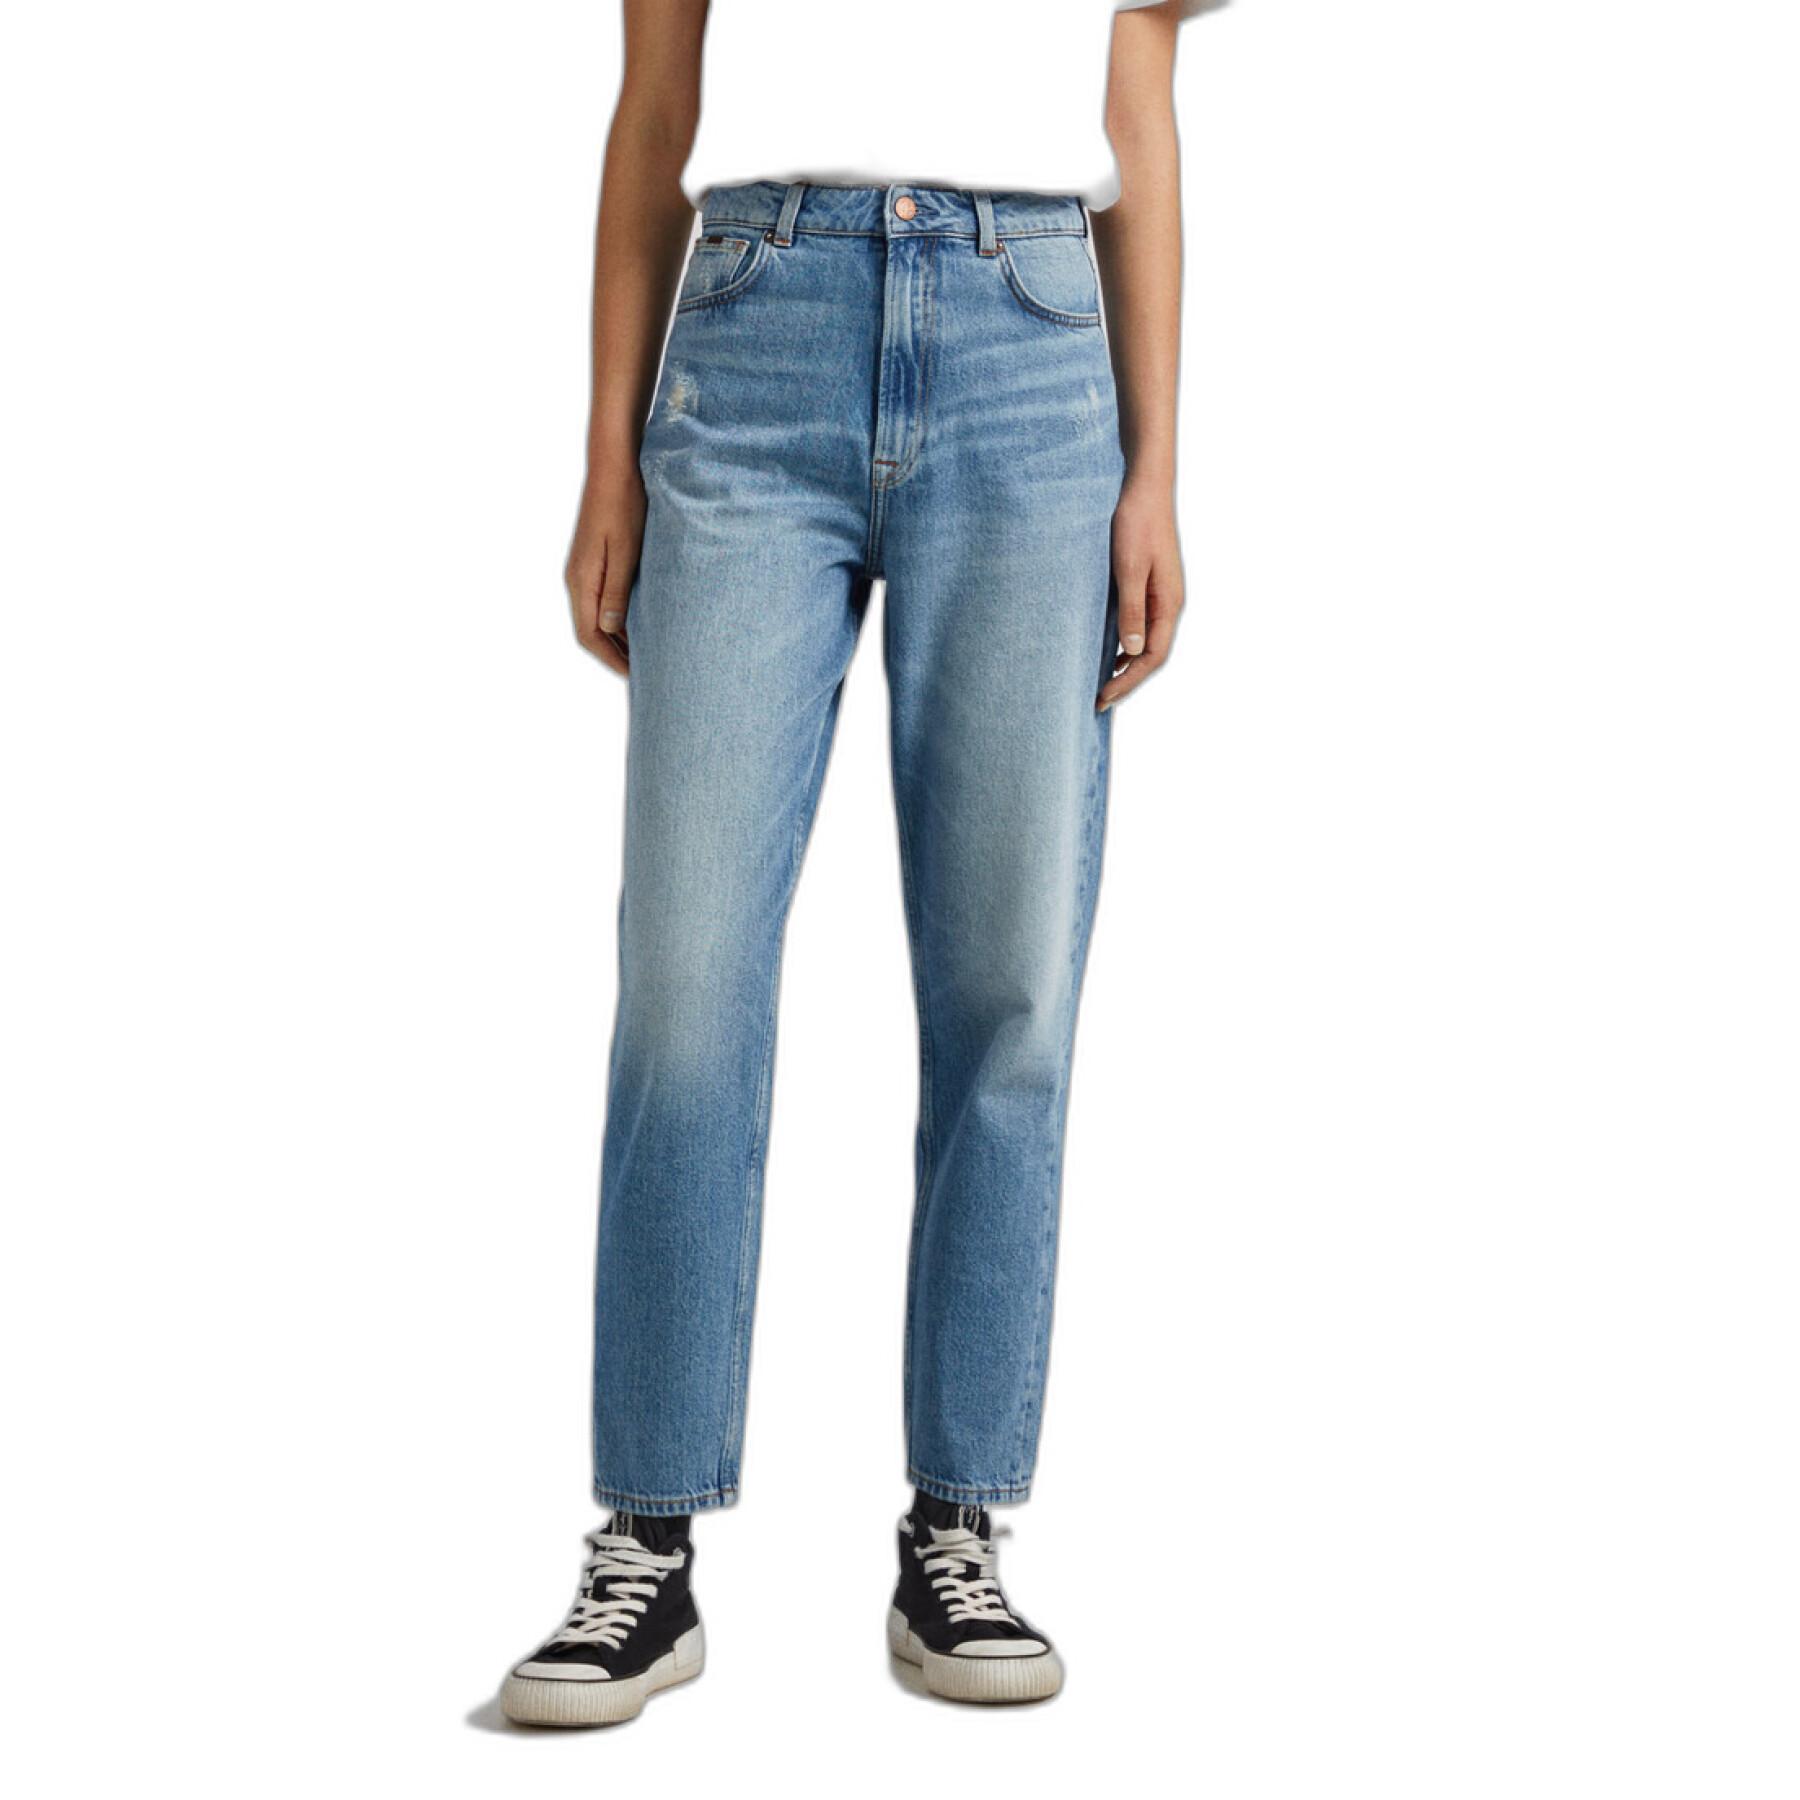 Jeans da donna Pepe Jeans Willow